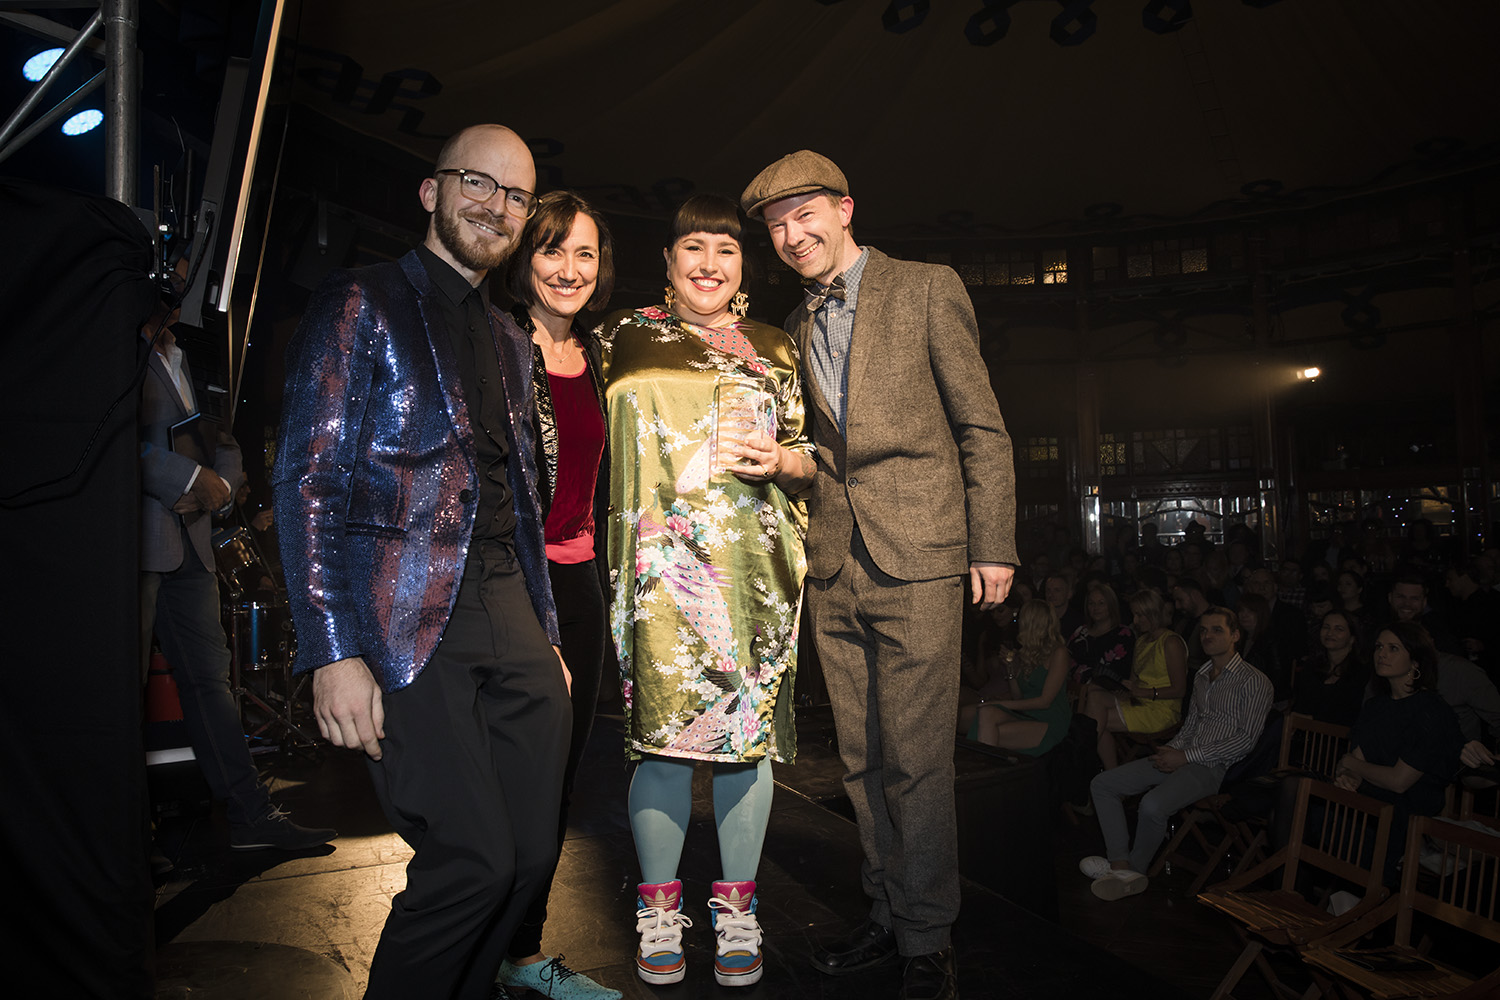 Phil, Carla and Ron accepting the Arts and Entertainment award at the 2015 Australia Podcast Awards from Claudia Taranto. All four are standing and smiling to camera, Carla is holding the award.